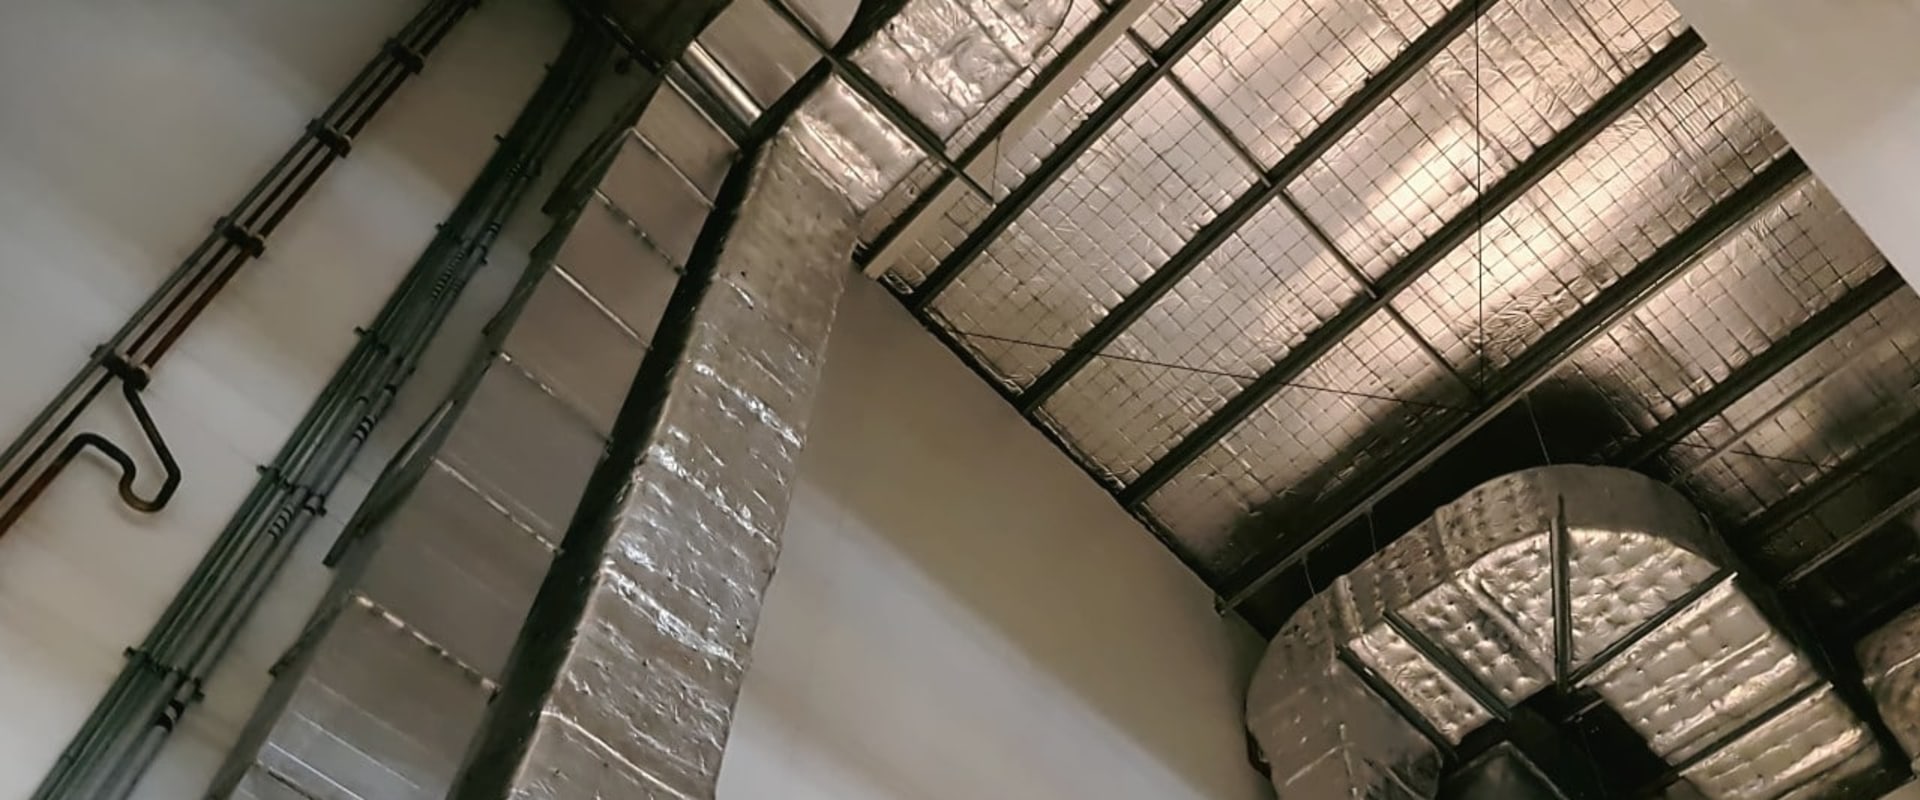 The Power of Aeroseal: Sealing Ducts Inside Walls for Optimal Home Energy Efficiency